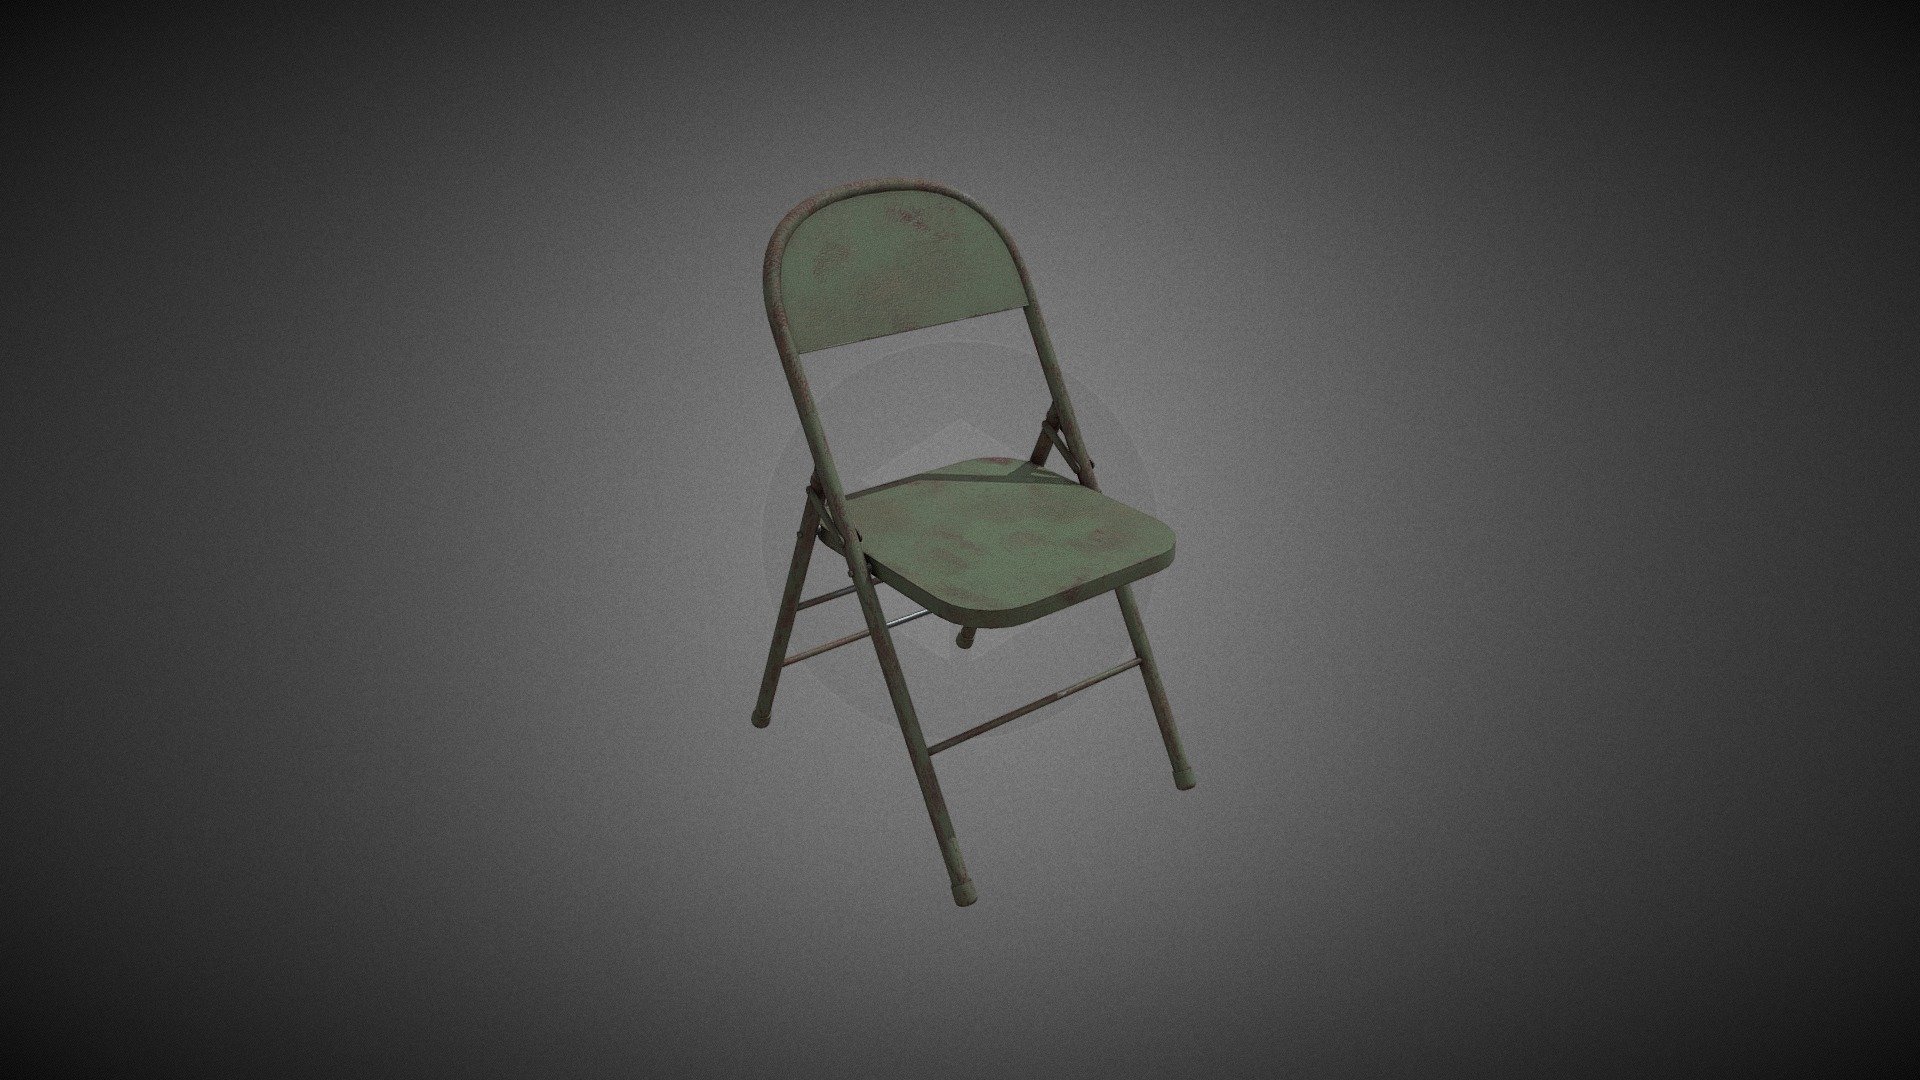 A very high quality, fully rigged Metallic Folding Chair with two looks, one new and other rusty.

The complete Chair model is a single mesh with single material. The model is completely rigged for the purpose of folding and unfolding animations.

Poly-count is kept as low as possible. All textures are very high quality with 2K resolution. All polygons are quads and no tris or N-Gons are used in geometry during production.


Key Features :

Available in 2 looks(1.Clean, 2.Rusty)
Minimum possible poly-counts
1 Mesh, 1 Material
Fully Rigged Real world scale
Only Quads(No tris or N-Gons)
Non-overlapping Unwrapped UVs
High quality 2K resolution textures


Model Information :

Vertices : 2,962
Faces : 2,579
Triangles : 5,158
Rigged : Yes
Animated : Yes
UV Mapped: Yes(Non-Overlapping)


Textures :

Base Color
Metallic Map
Roughness Map
Specular Map
AO Map
Normal Map


Animations :

Default
Closed
Closing
Opened
Opening
 - Folding Chair - Buy Royalty Free 3D model by Game Art Universe (@gameartuniverse) 3d model